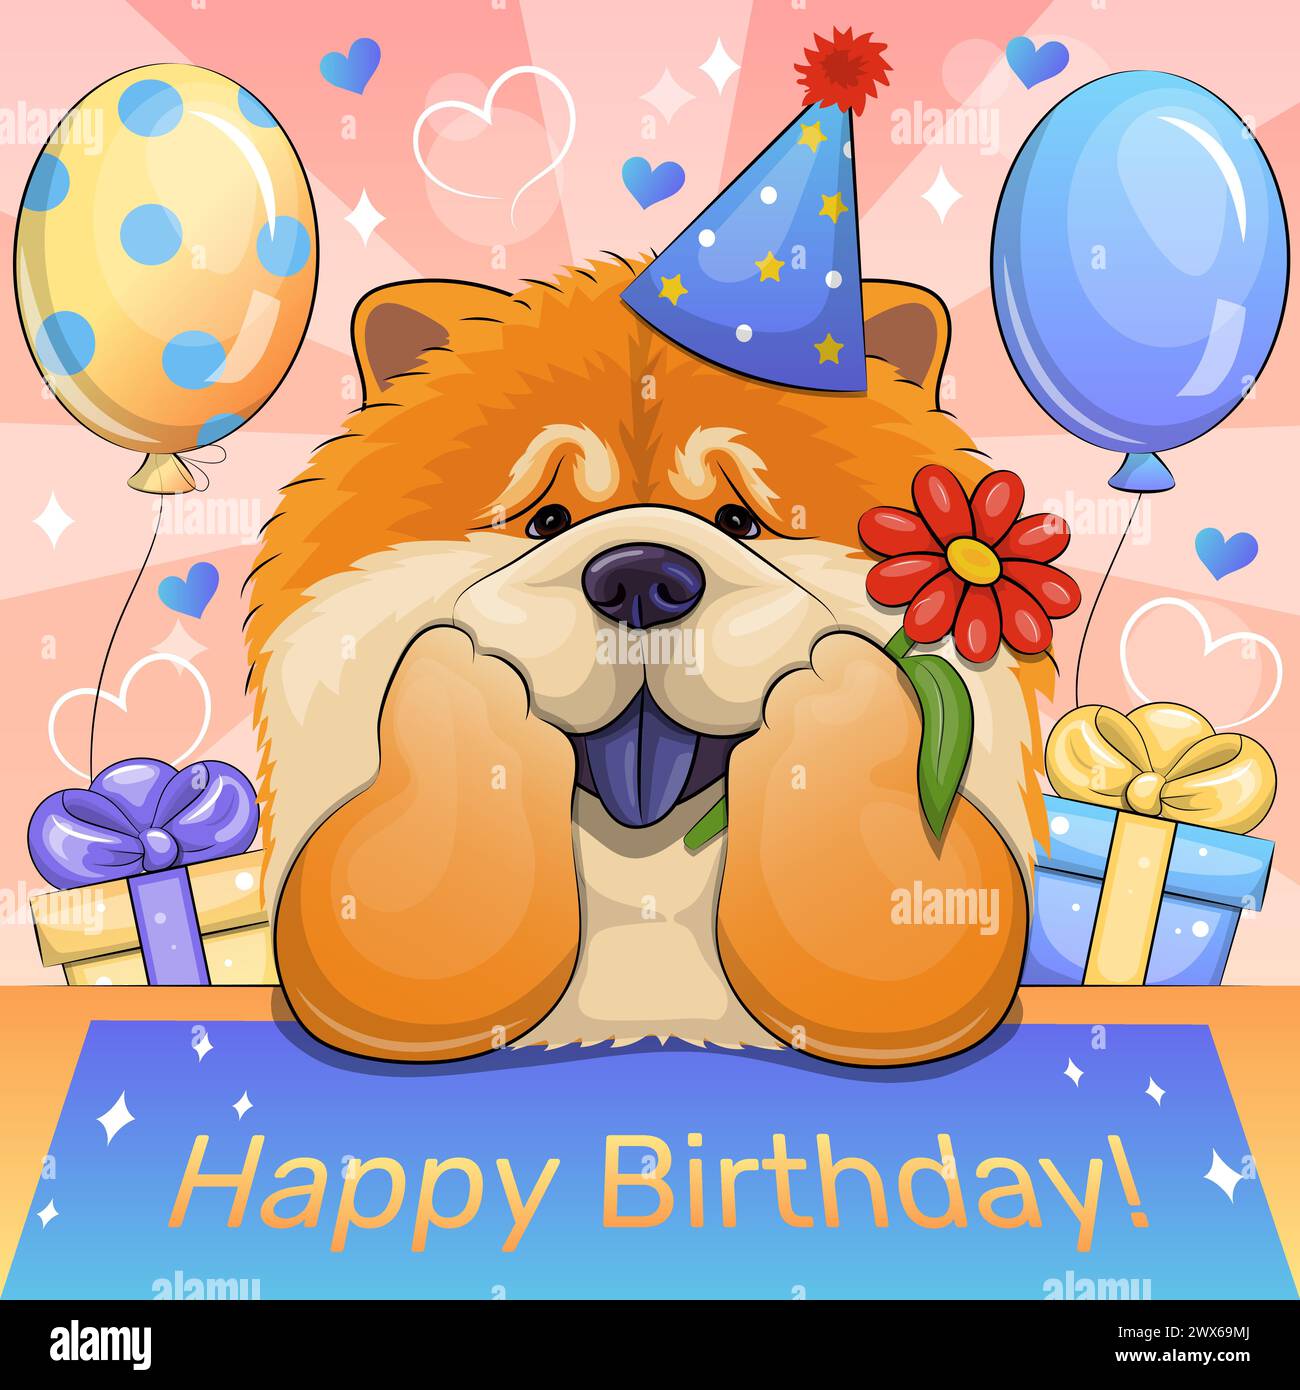 Cute cartoon chow chow dog wearing a party hat. Birthday vector illustration with gifts and balloons. Stock Vector